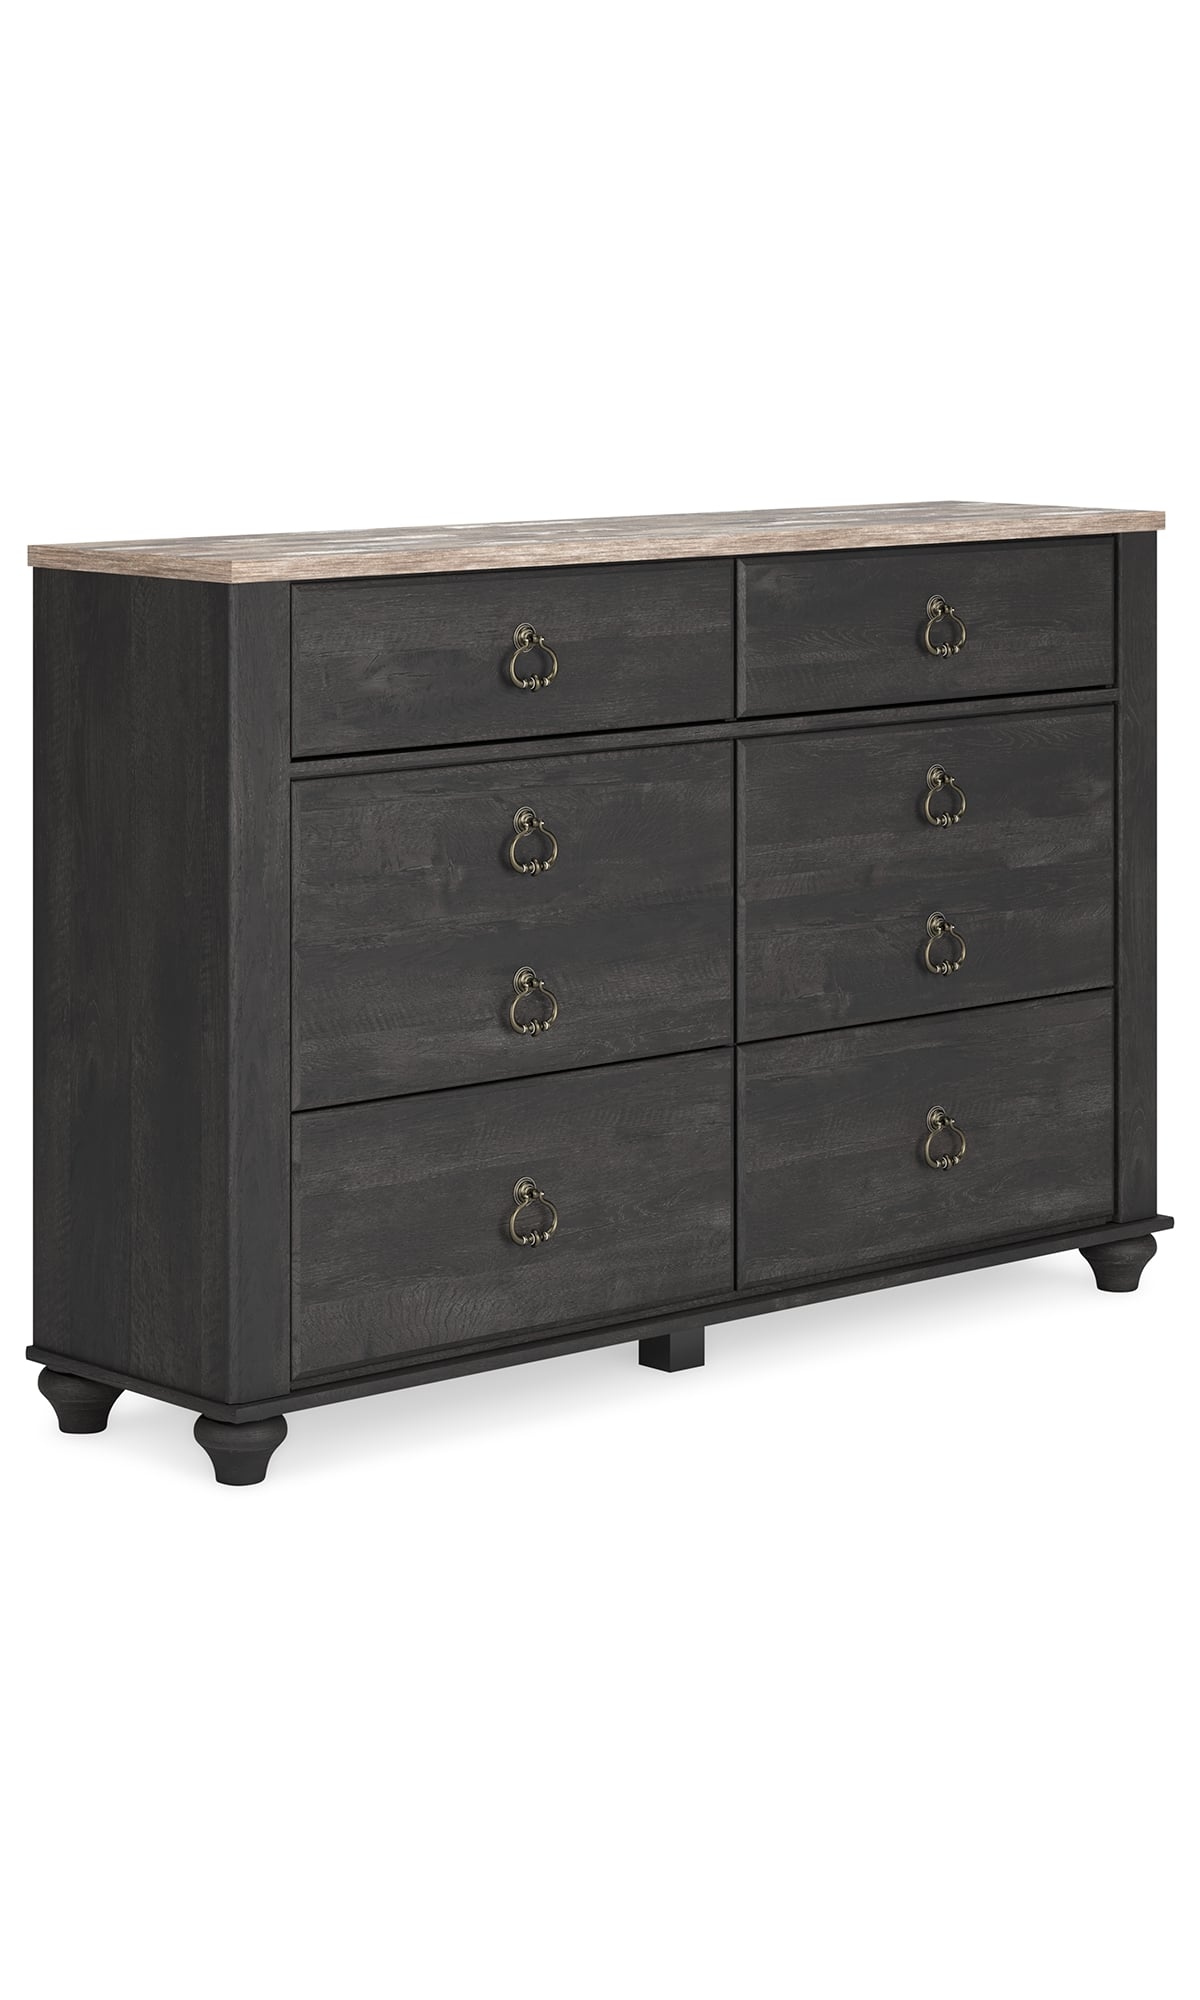 Signature Design by Ashley Brynhurst B788-31 Traditional 9 Drawer Dresser  with Felt-Lined Drawers | Royal Furniture | Dressers